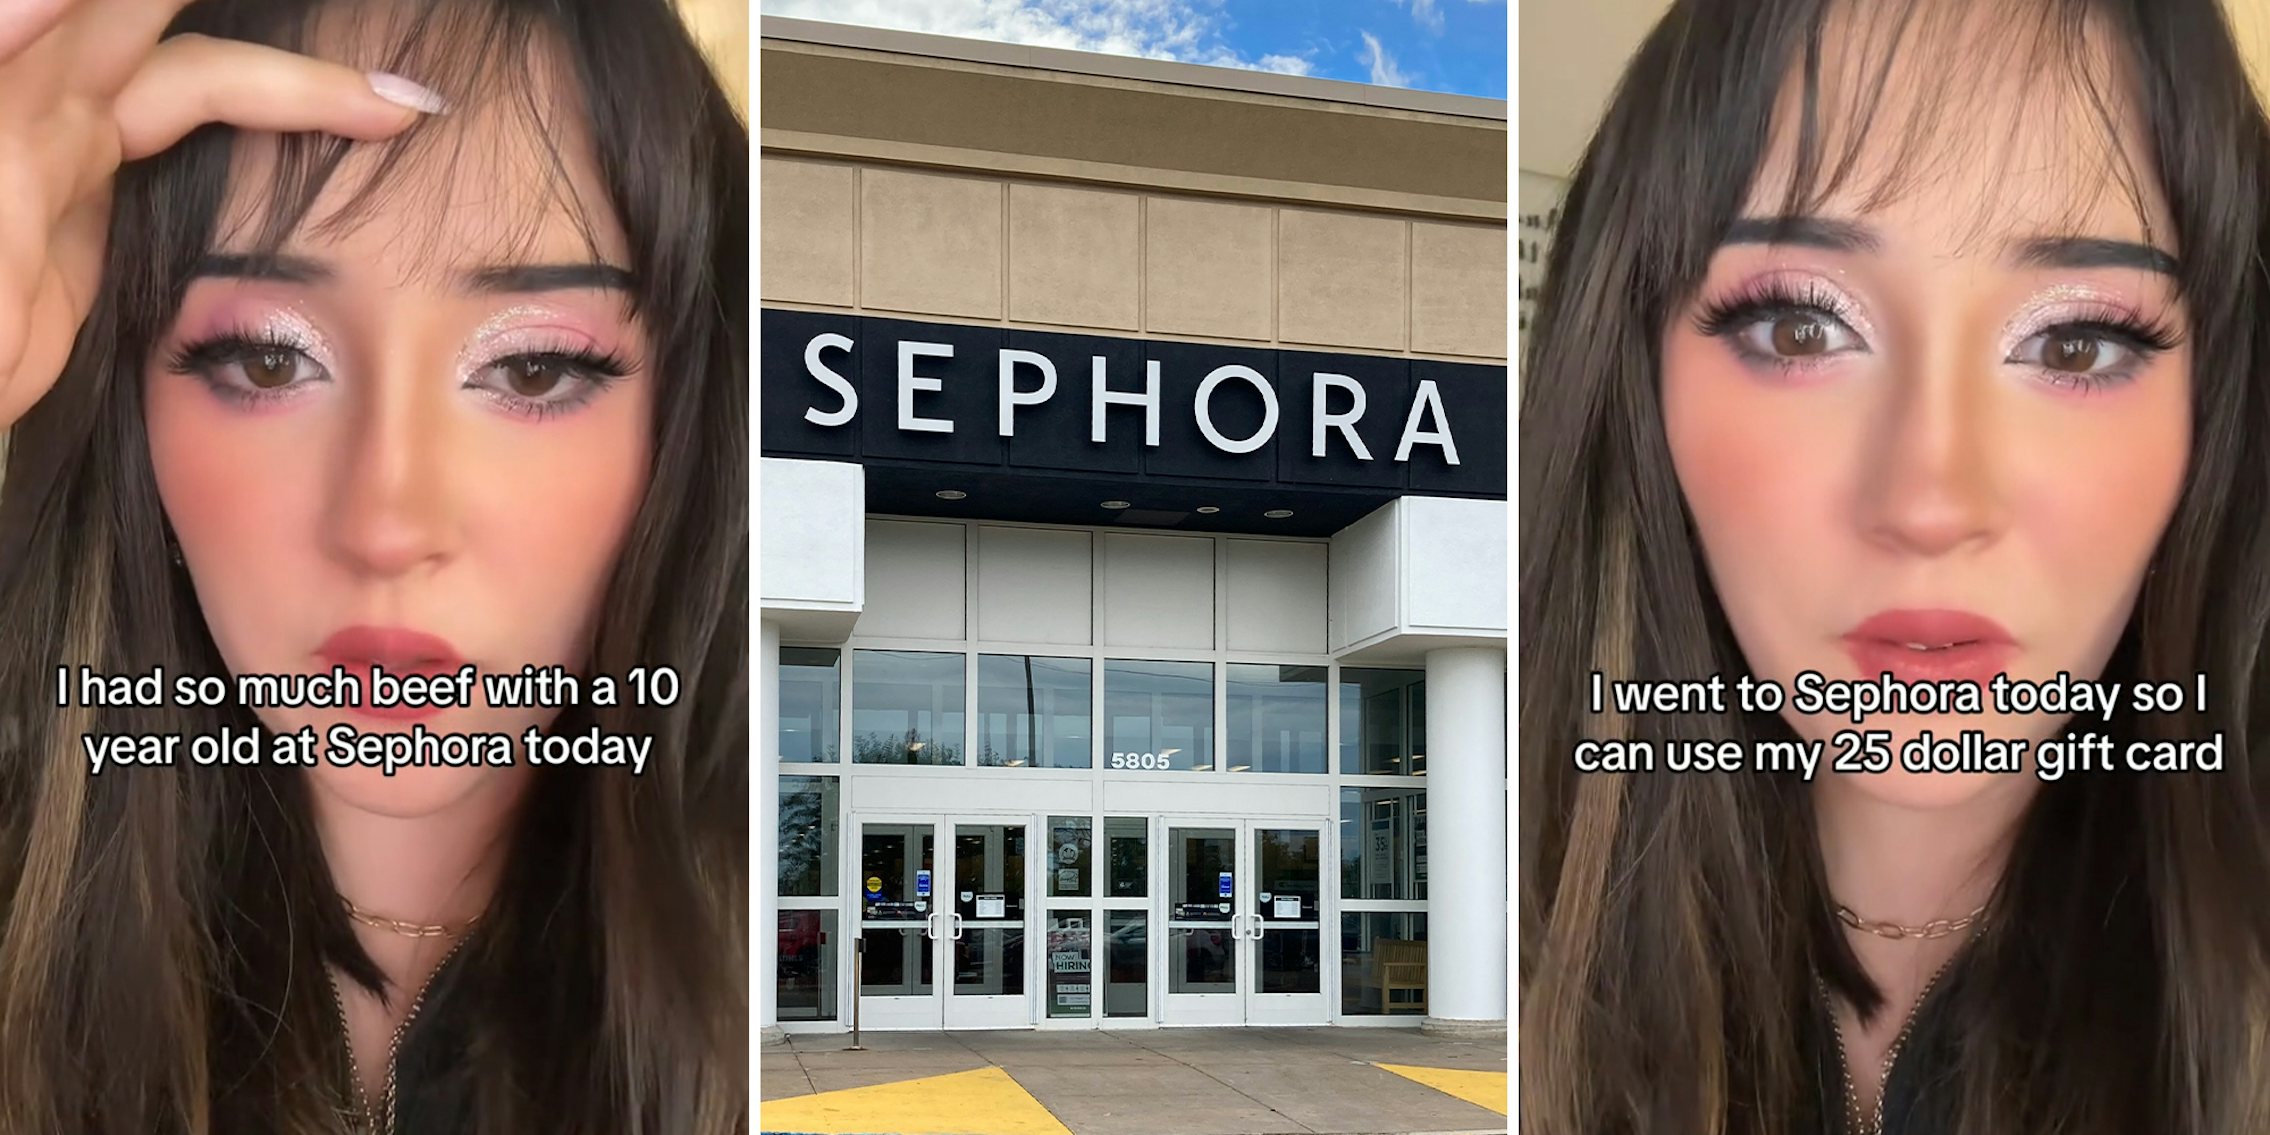 Customer Says She Almost Fought A 10 Year Old At Sephora